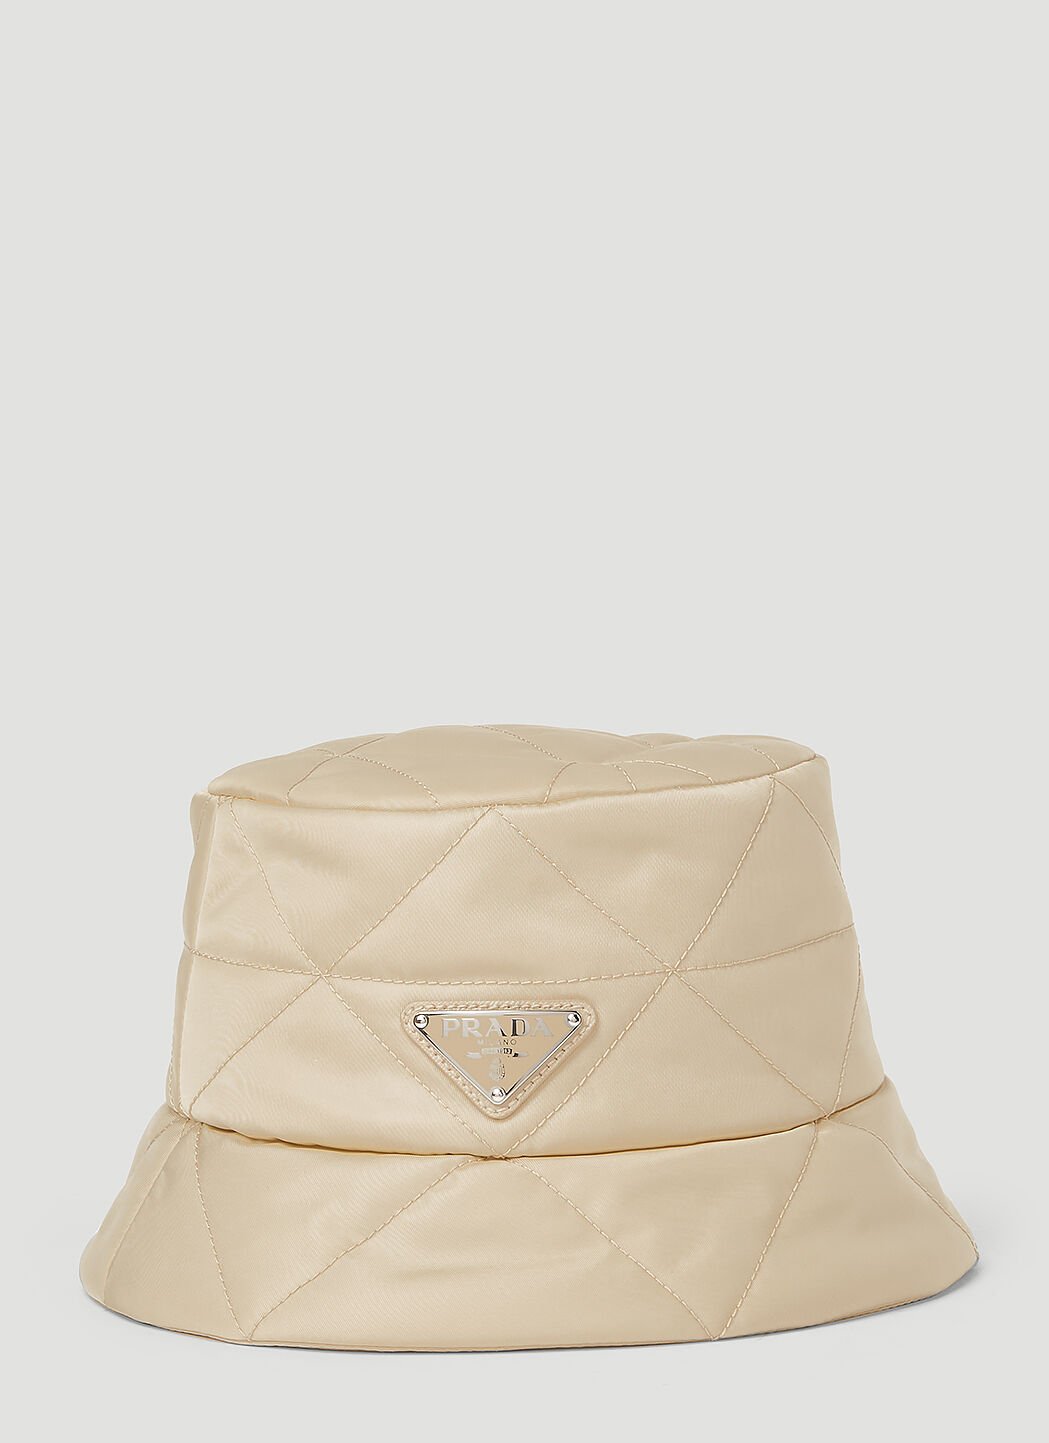 Gucci Quilted Logo Bucket Hat Black guc0255176